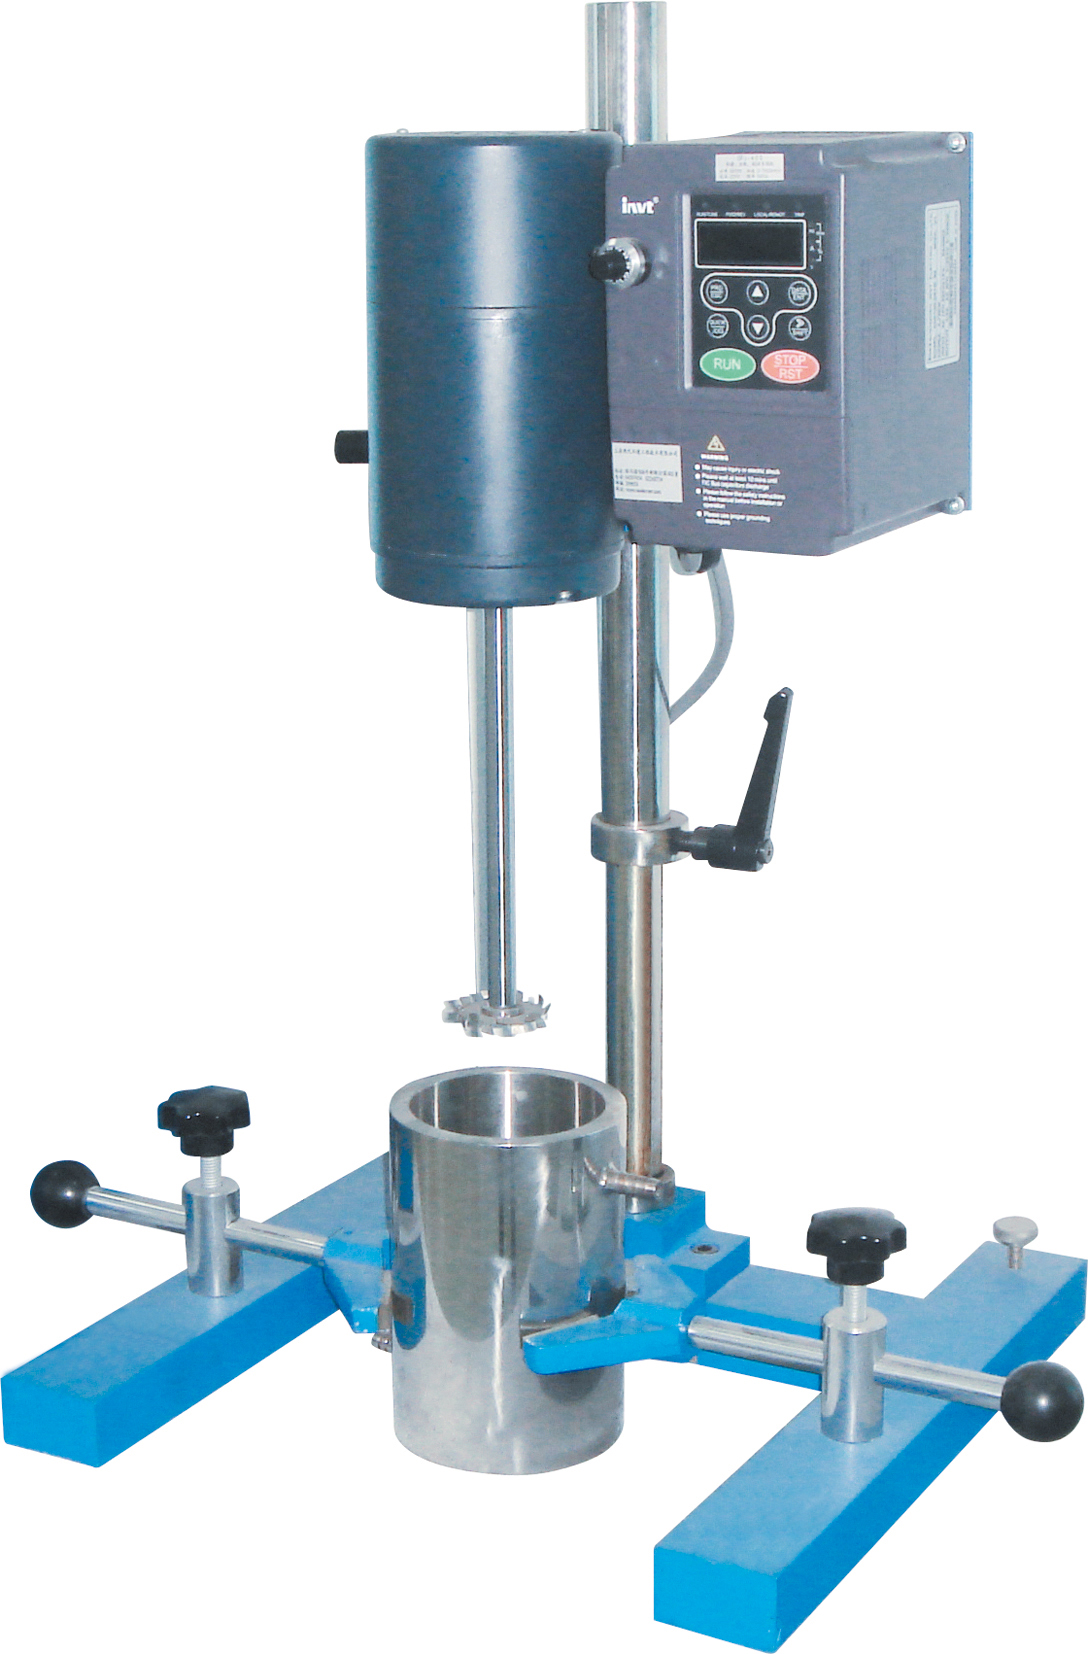 SDF-04B multifunctional grinding and dispersion machine